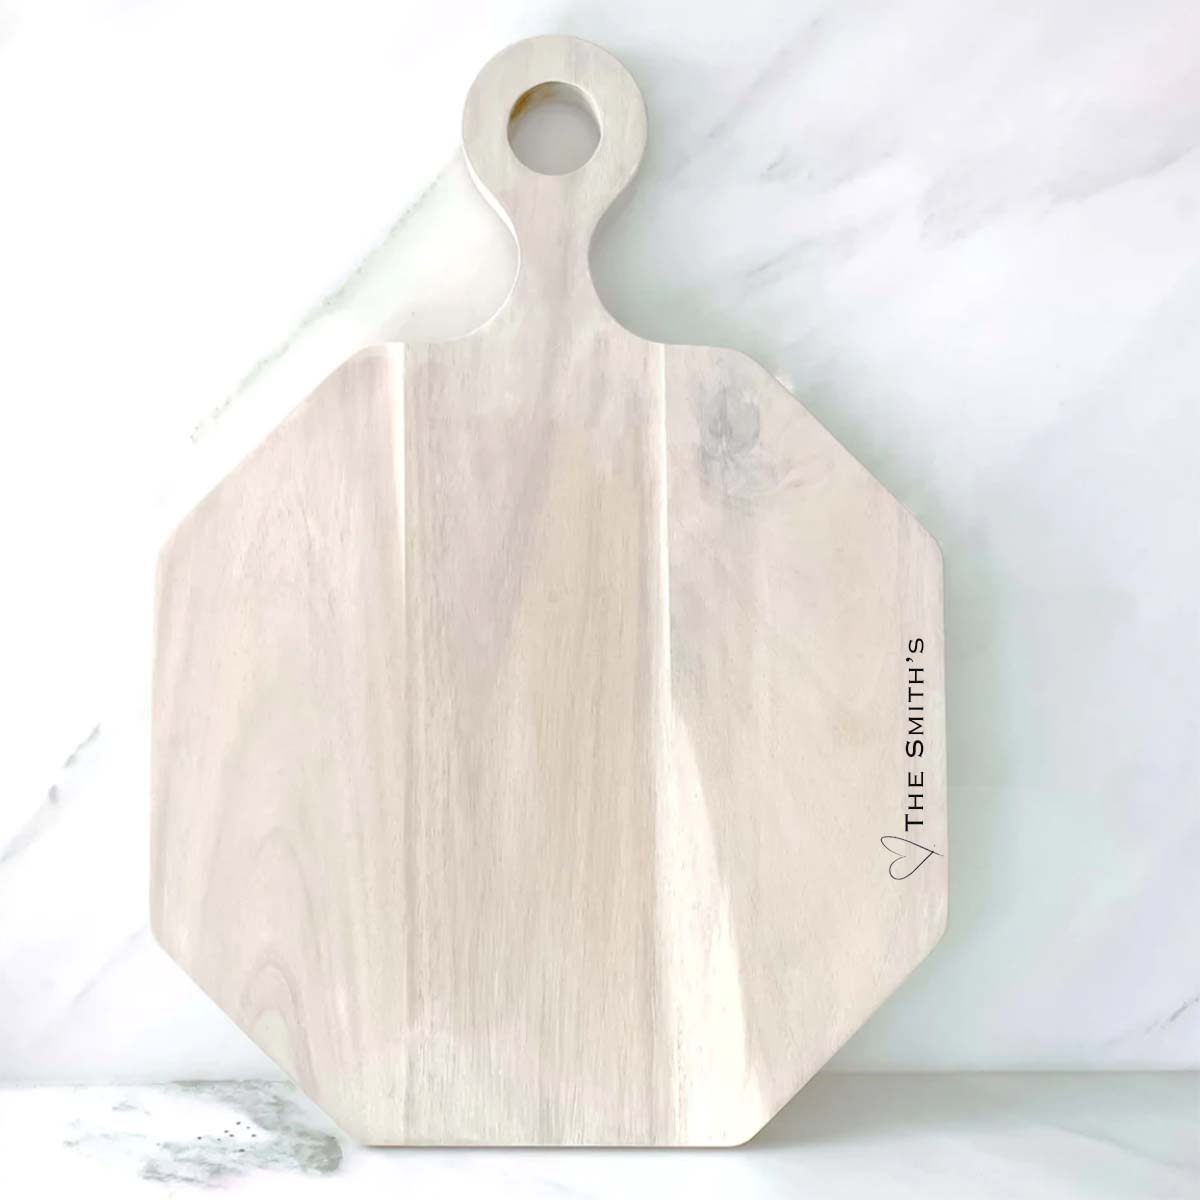 *Buy 1 Get 1 Free Whitewashed Charcuterie Board + Free Engraving